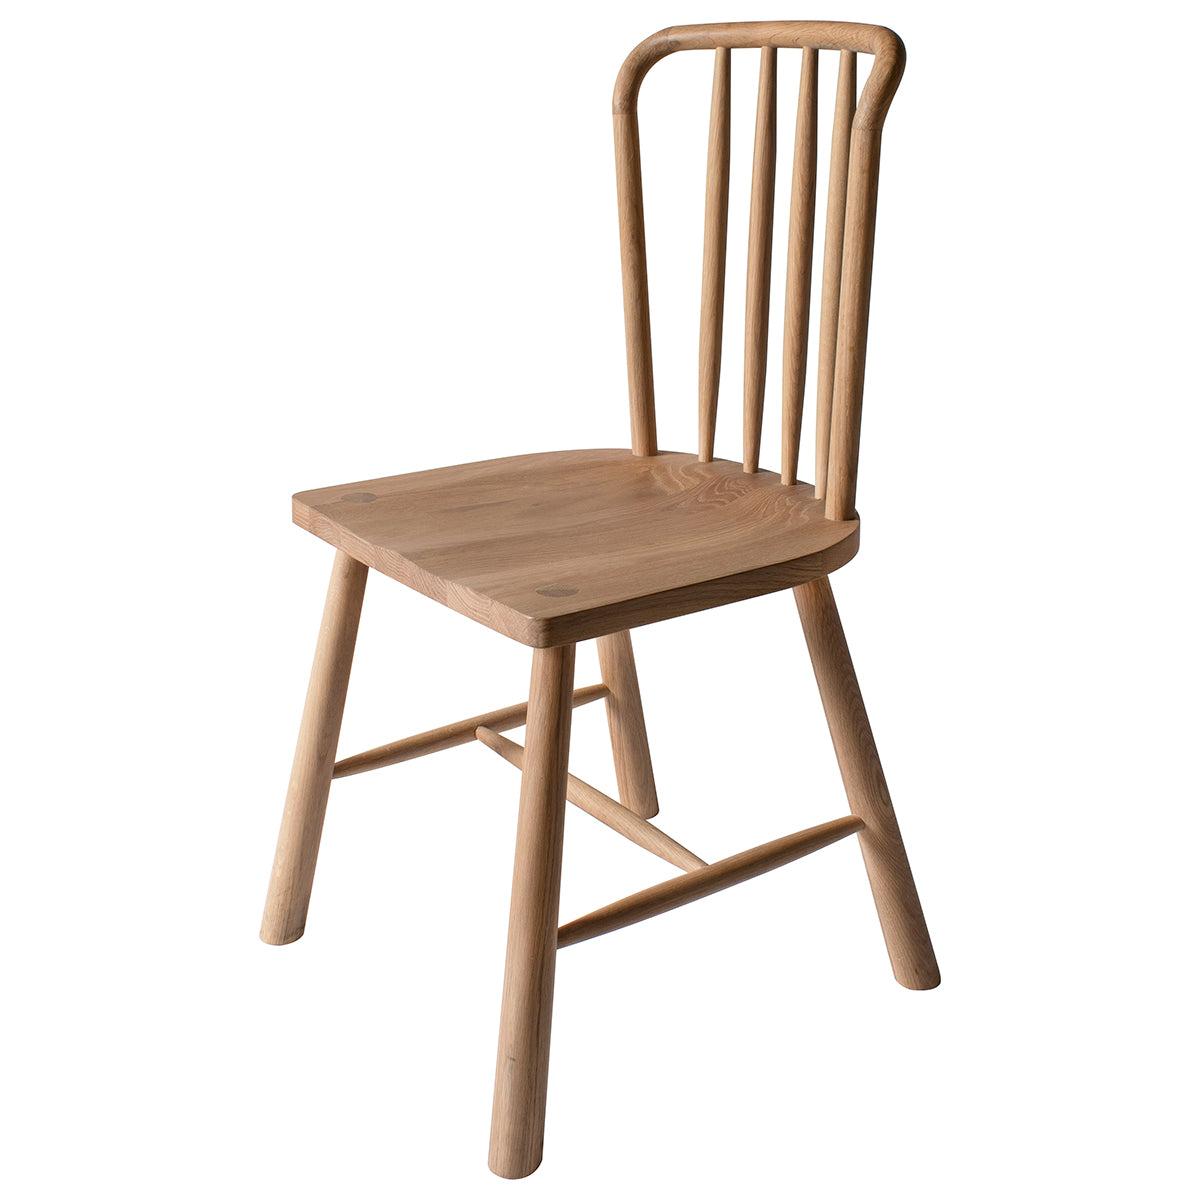 A Tigley Dining Chair 450x455x920mm (2pk) by Kikiathome.co.uk, perfect for home furniture and interior decor, displayed on a white background.